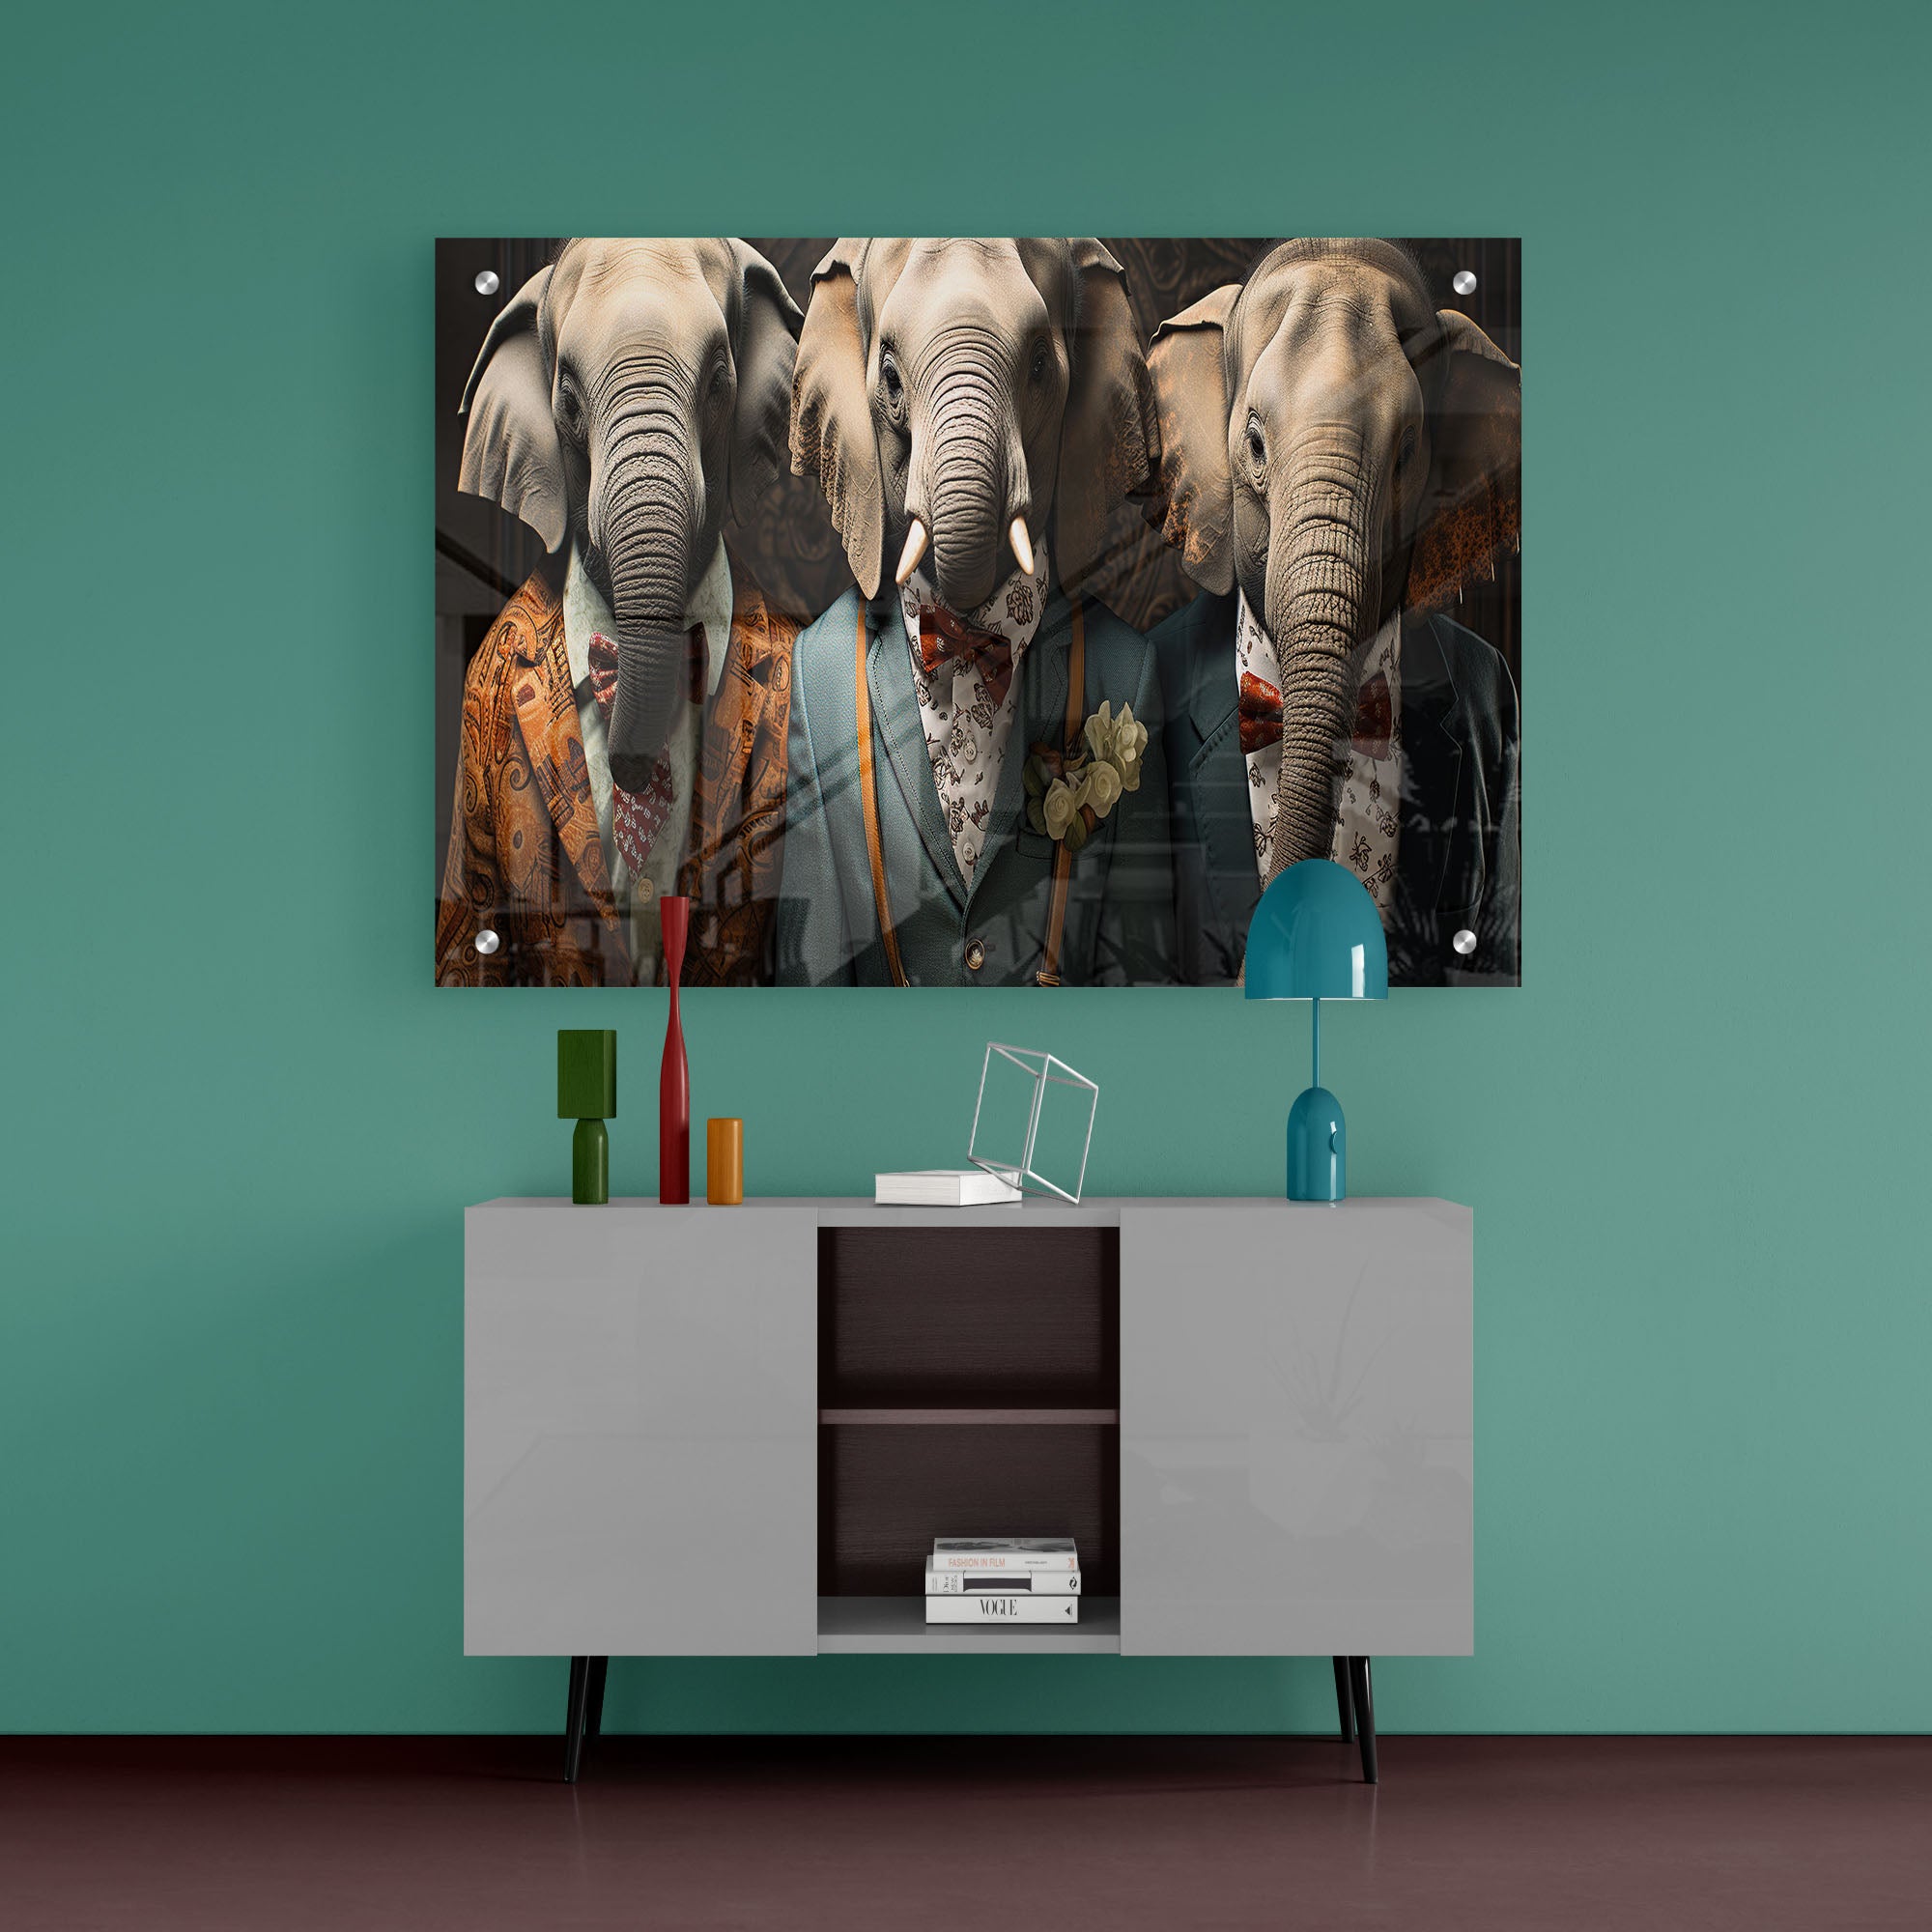 Three Elephants In Suit Acrylic Wall Painting